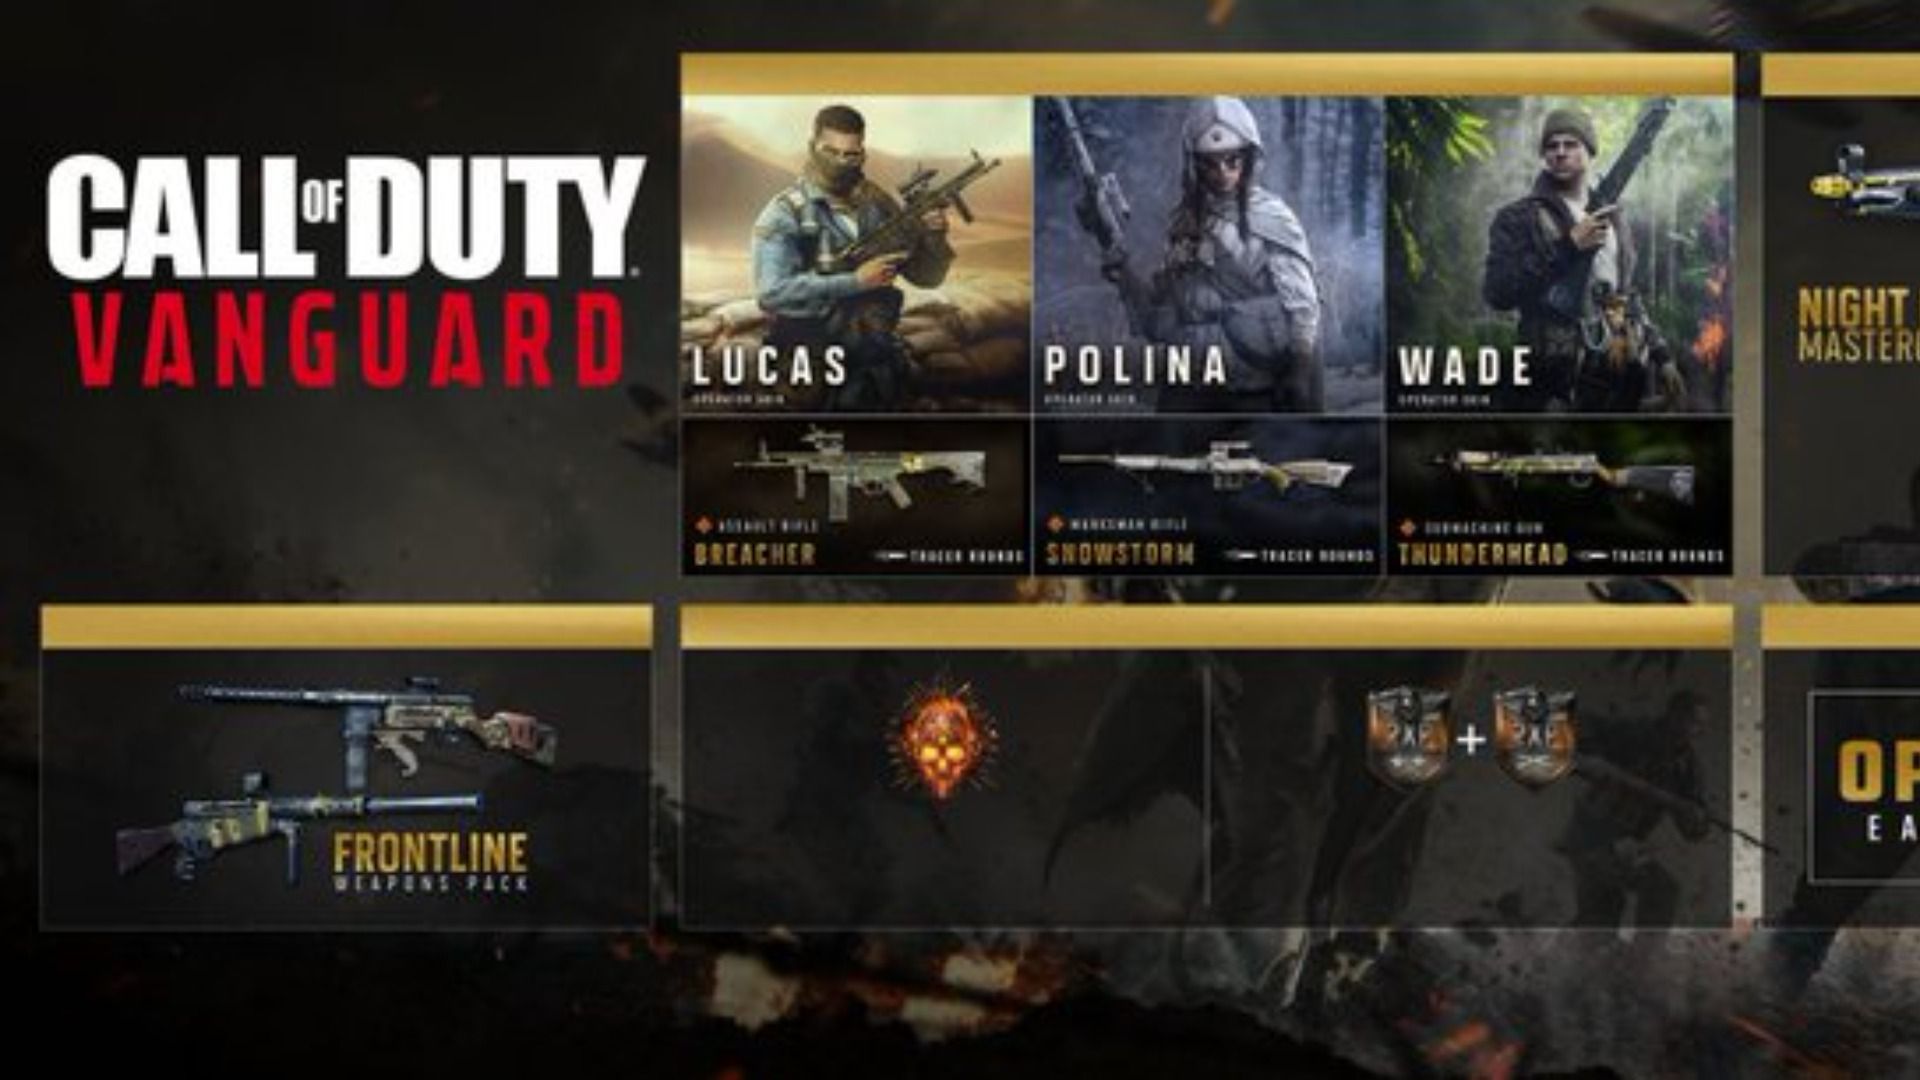 Call Of Duty Vanguard Leaked Cover Confirms WWII Setting And Cross Gen Bundle